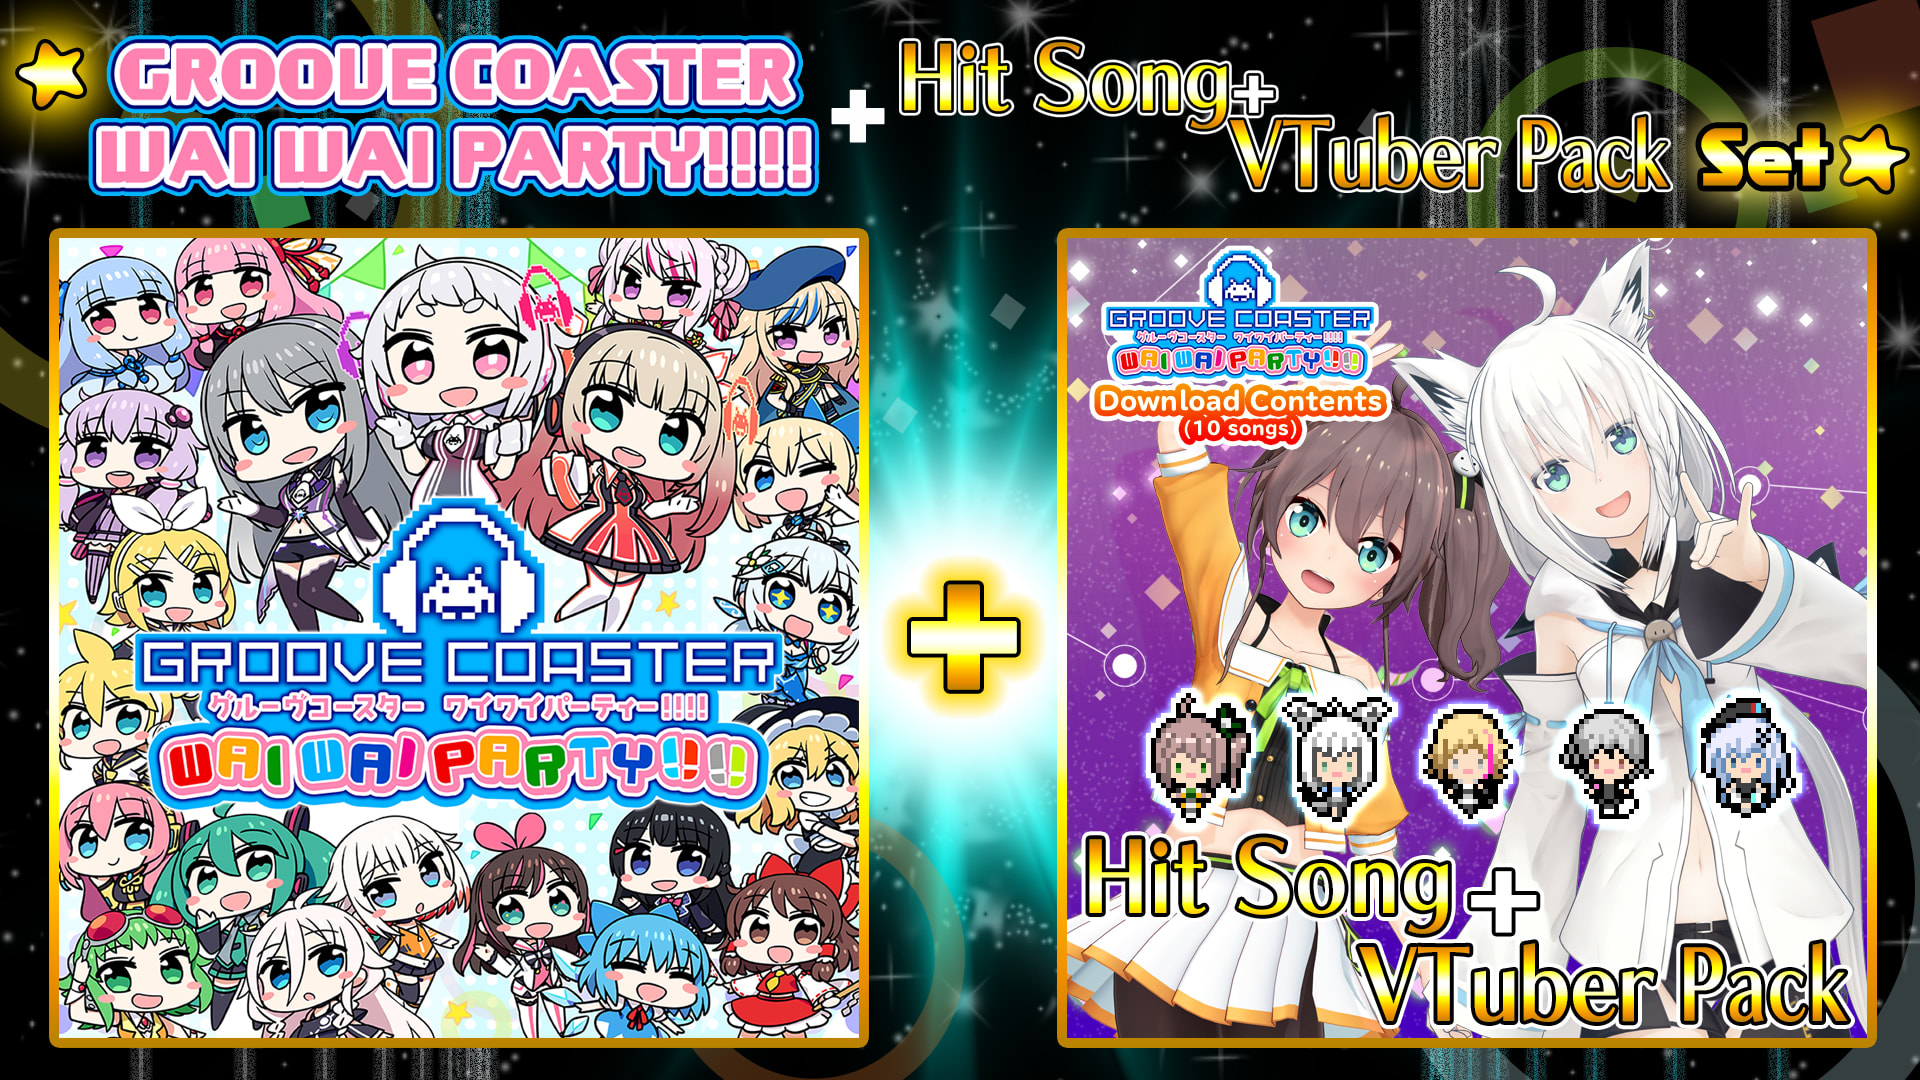 GROOVE COASTER WAI WAI PARTY!!!! + Hit Song+VTuber Pack Set